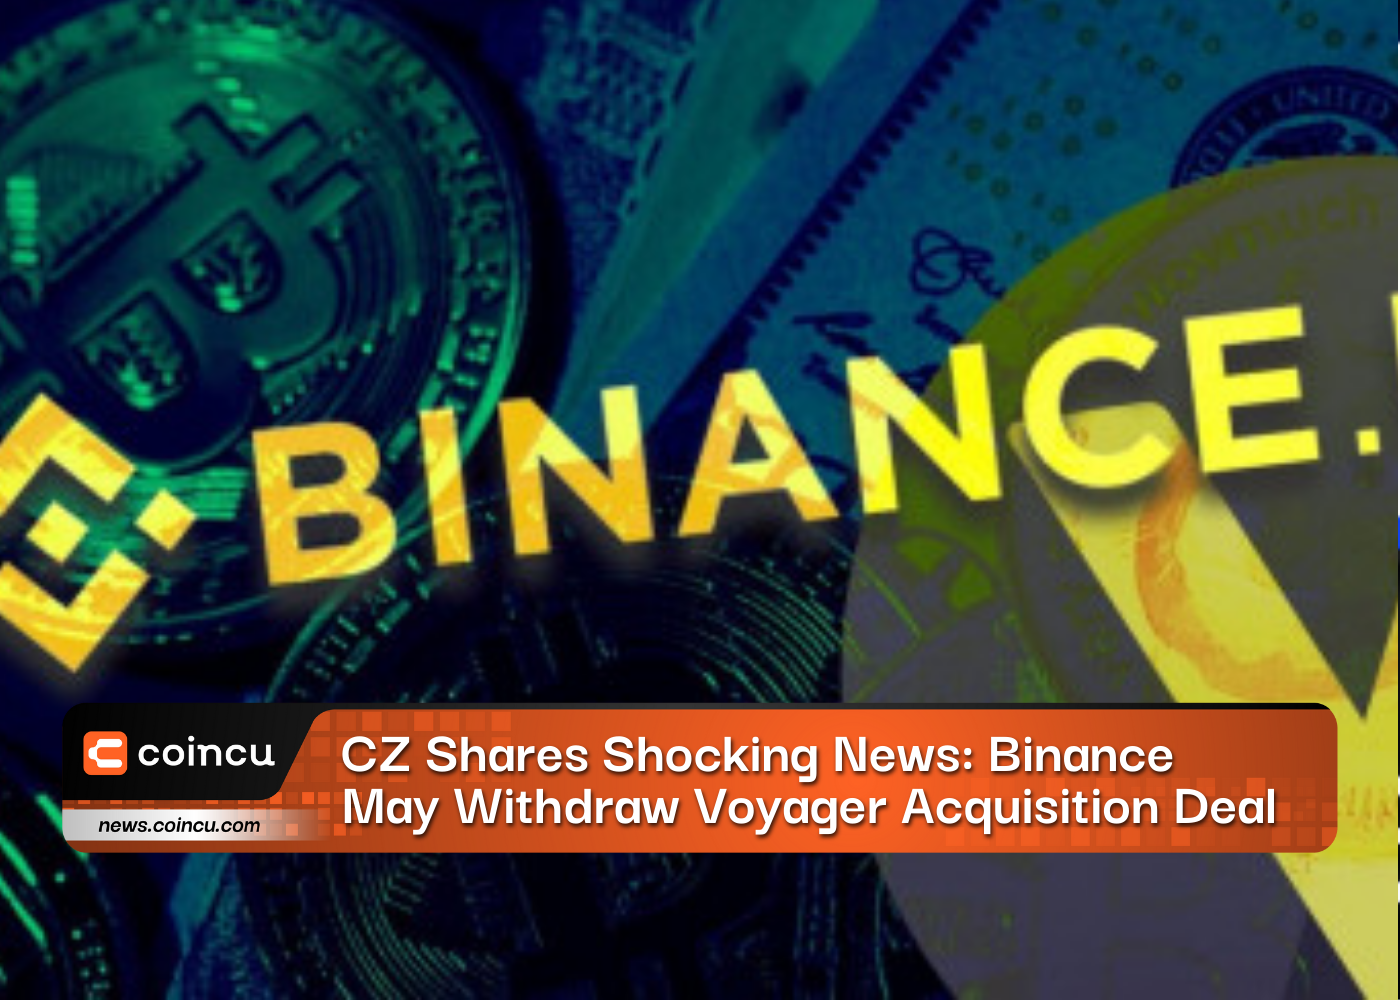 CZ Shares Shocking News: Binance May Withdraw Voyager Acquisition Deal